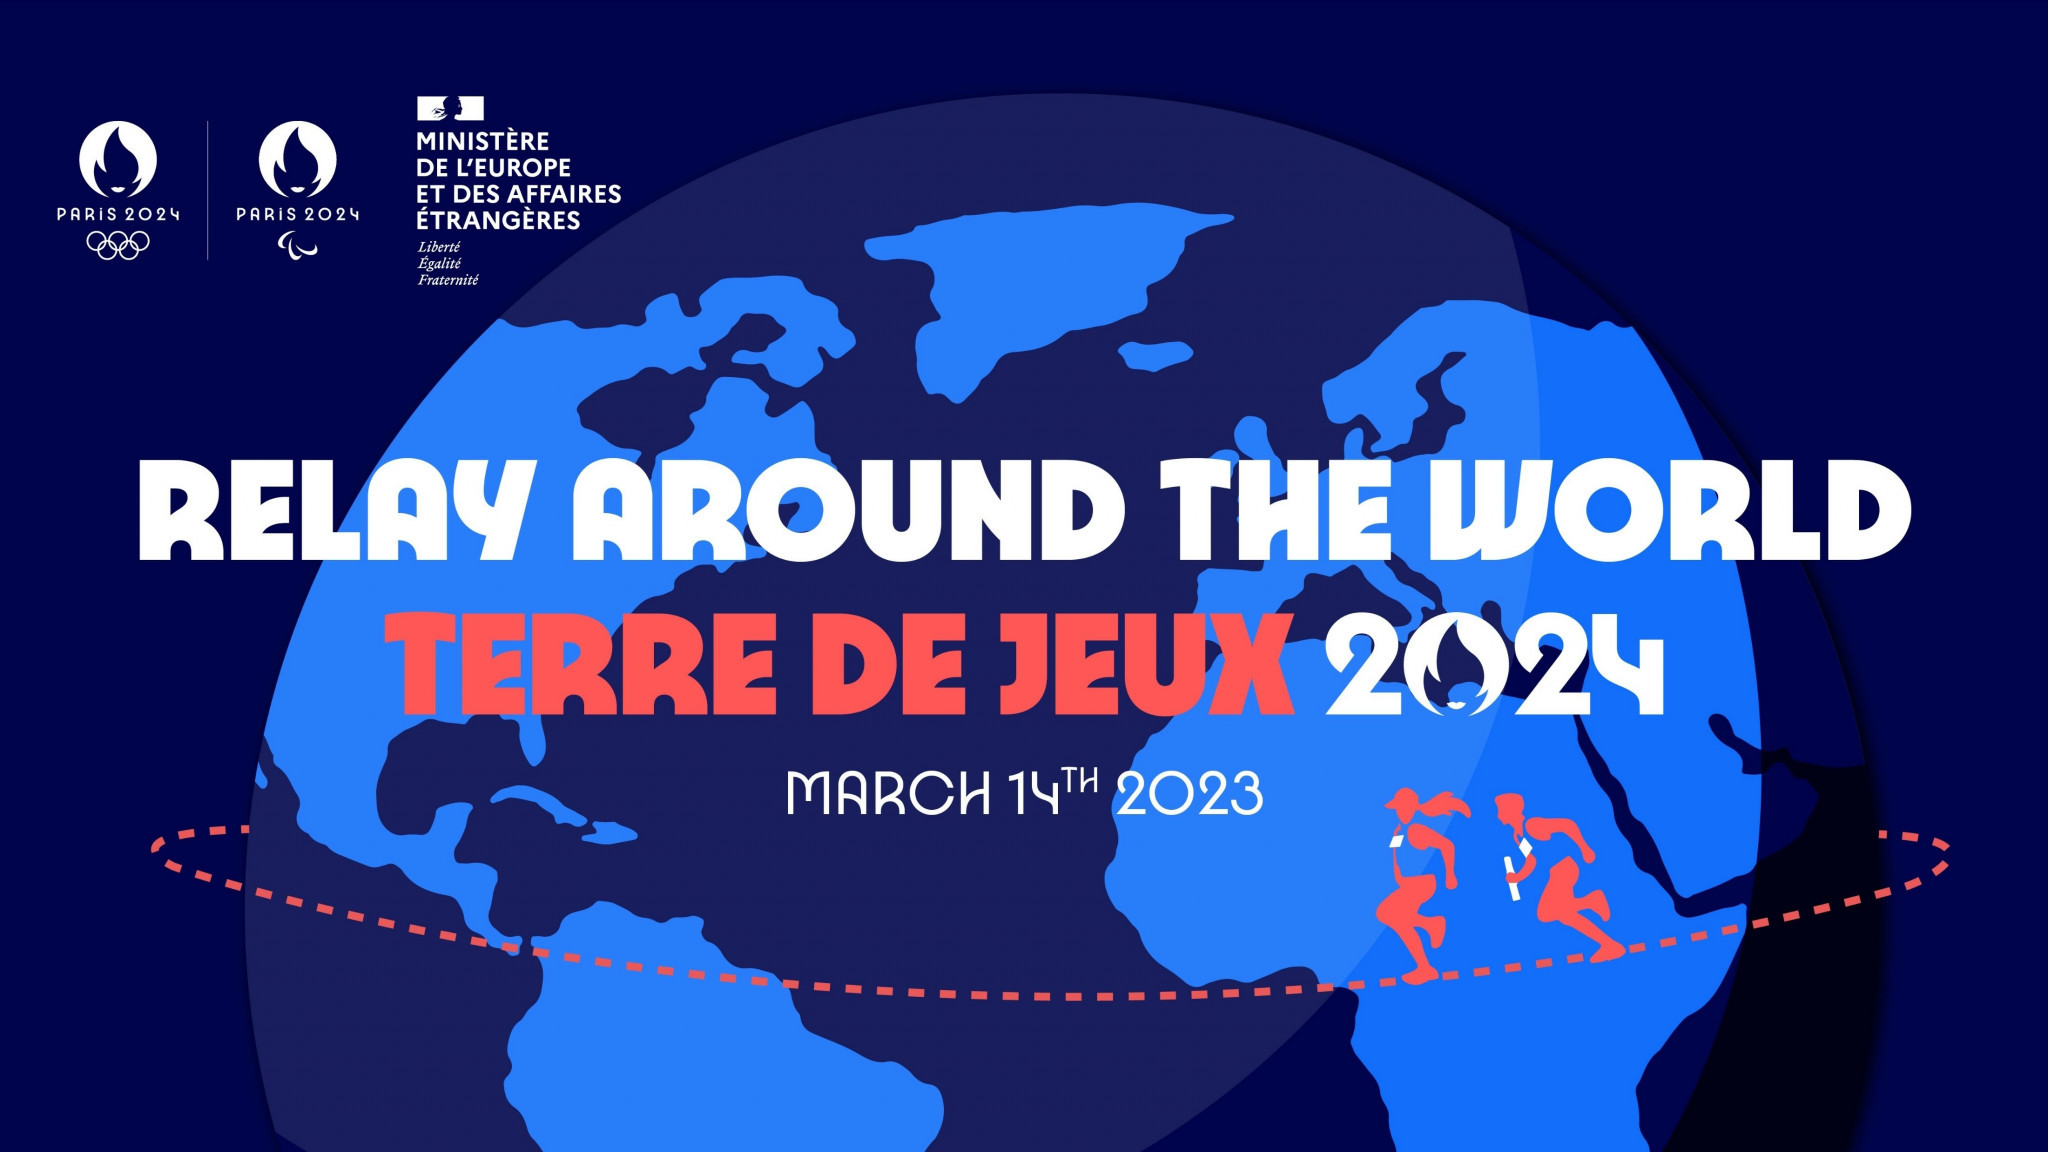 Paris 2024 organisers to mark 500 days to go with 24-hour worldwide Relay